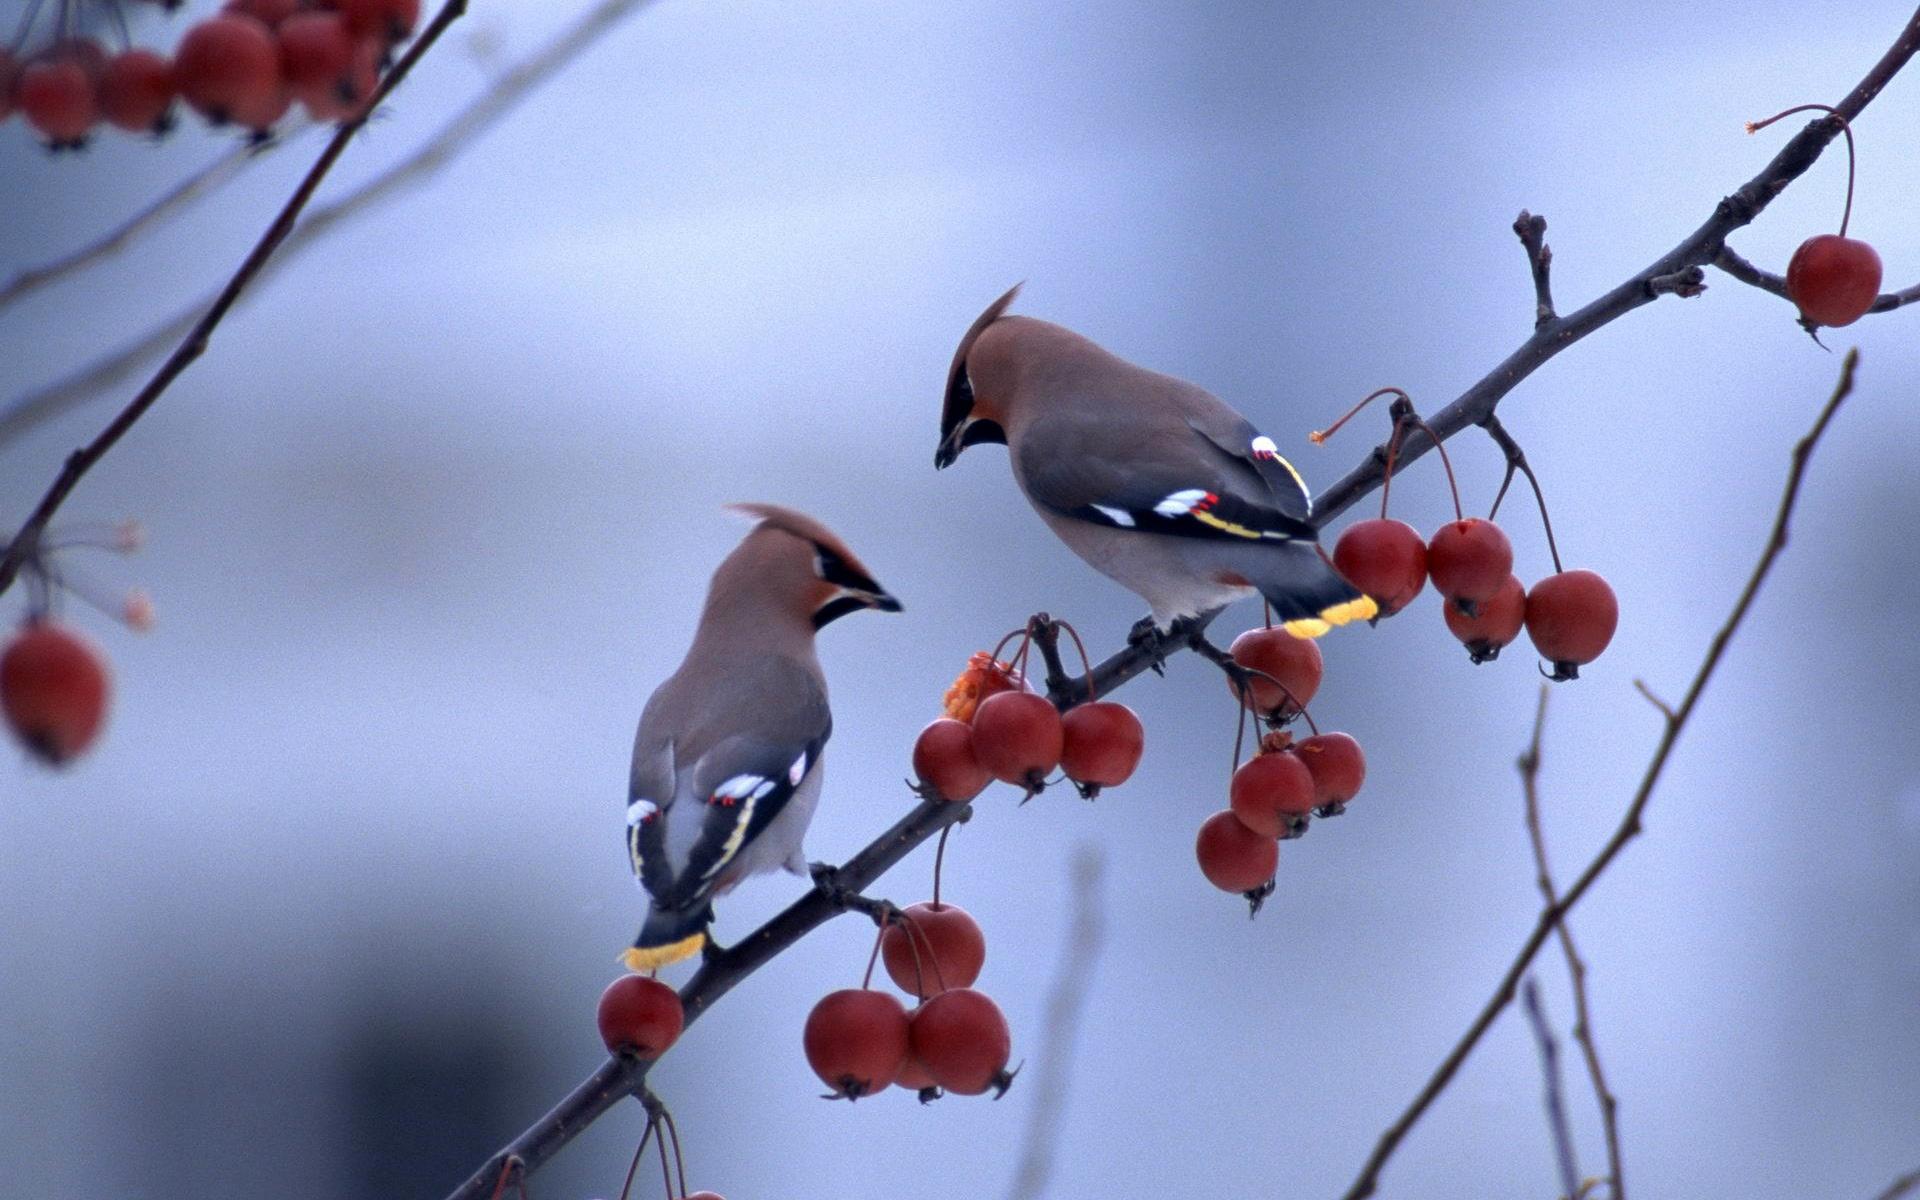 Two birds standing in the berries tree branch wallpaper Collection